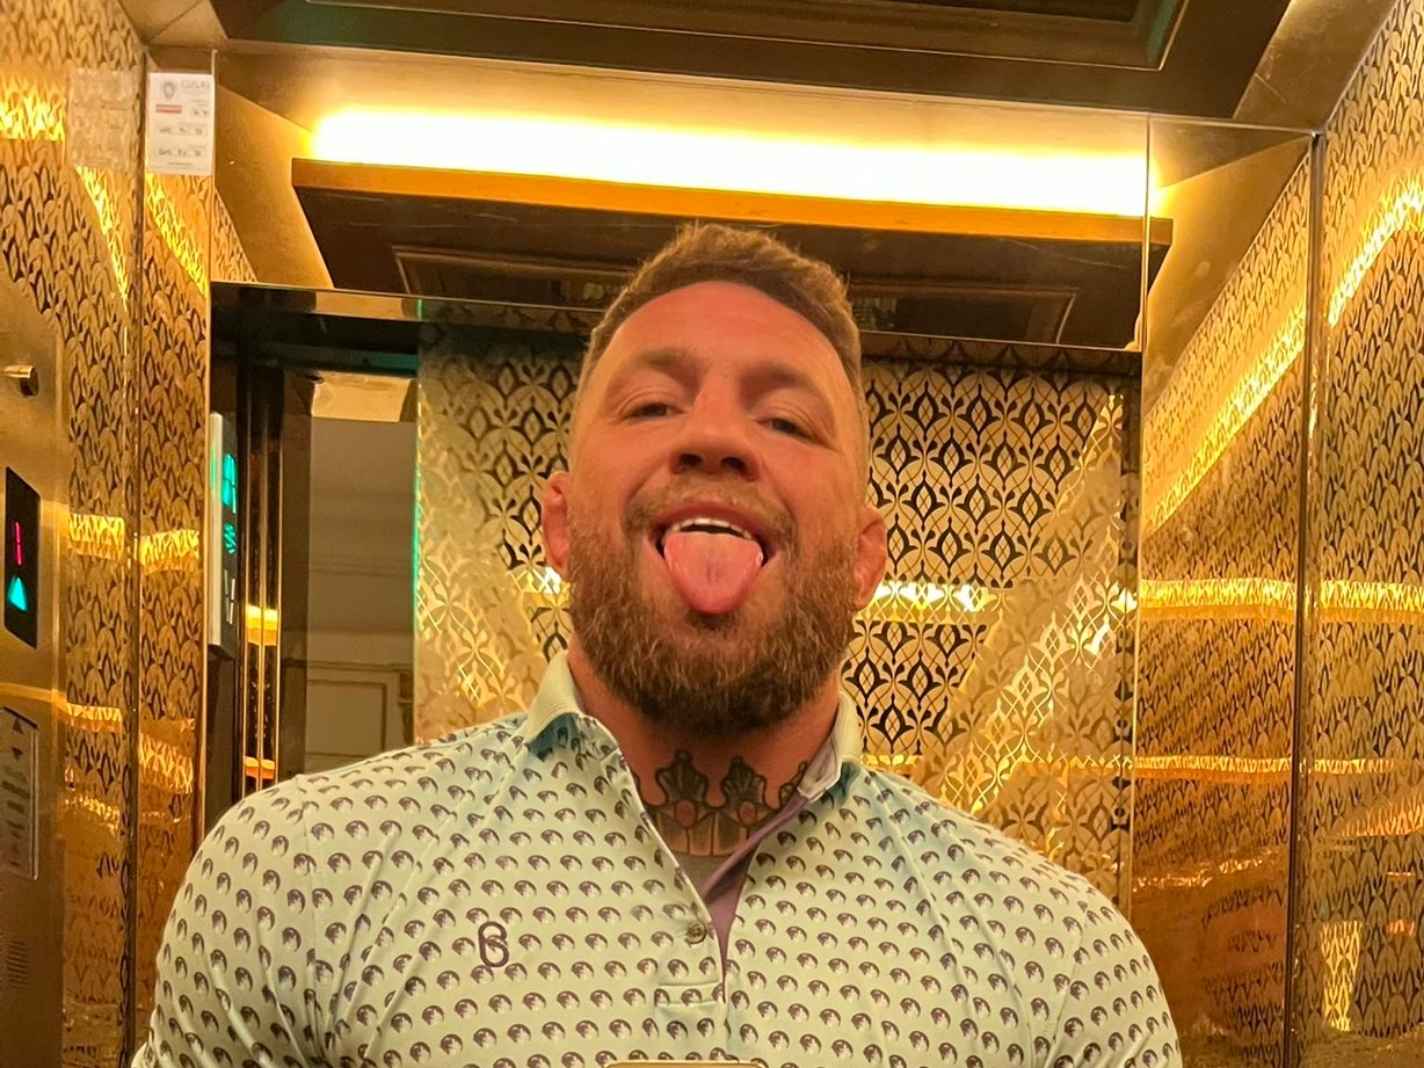 Conor McGregor can't stop tweeting about his desire to buy Chelsea